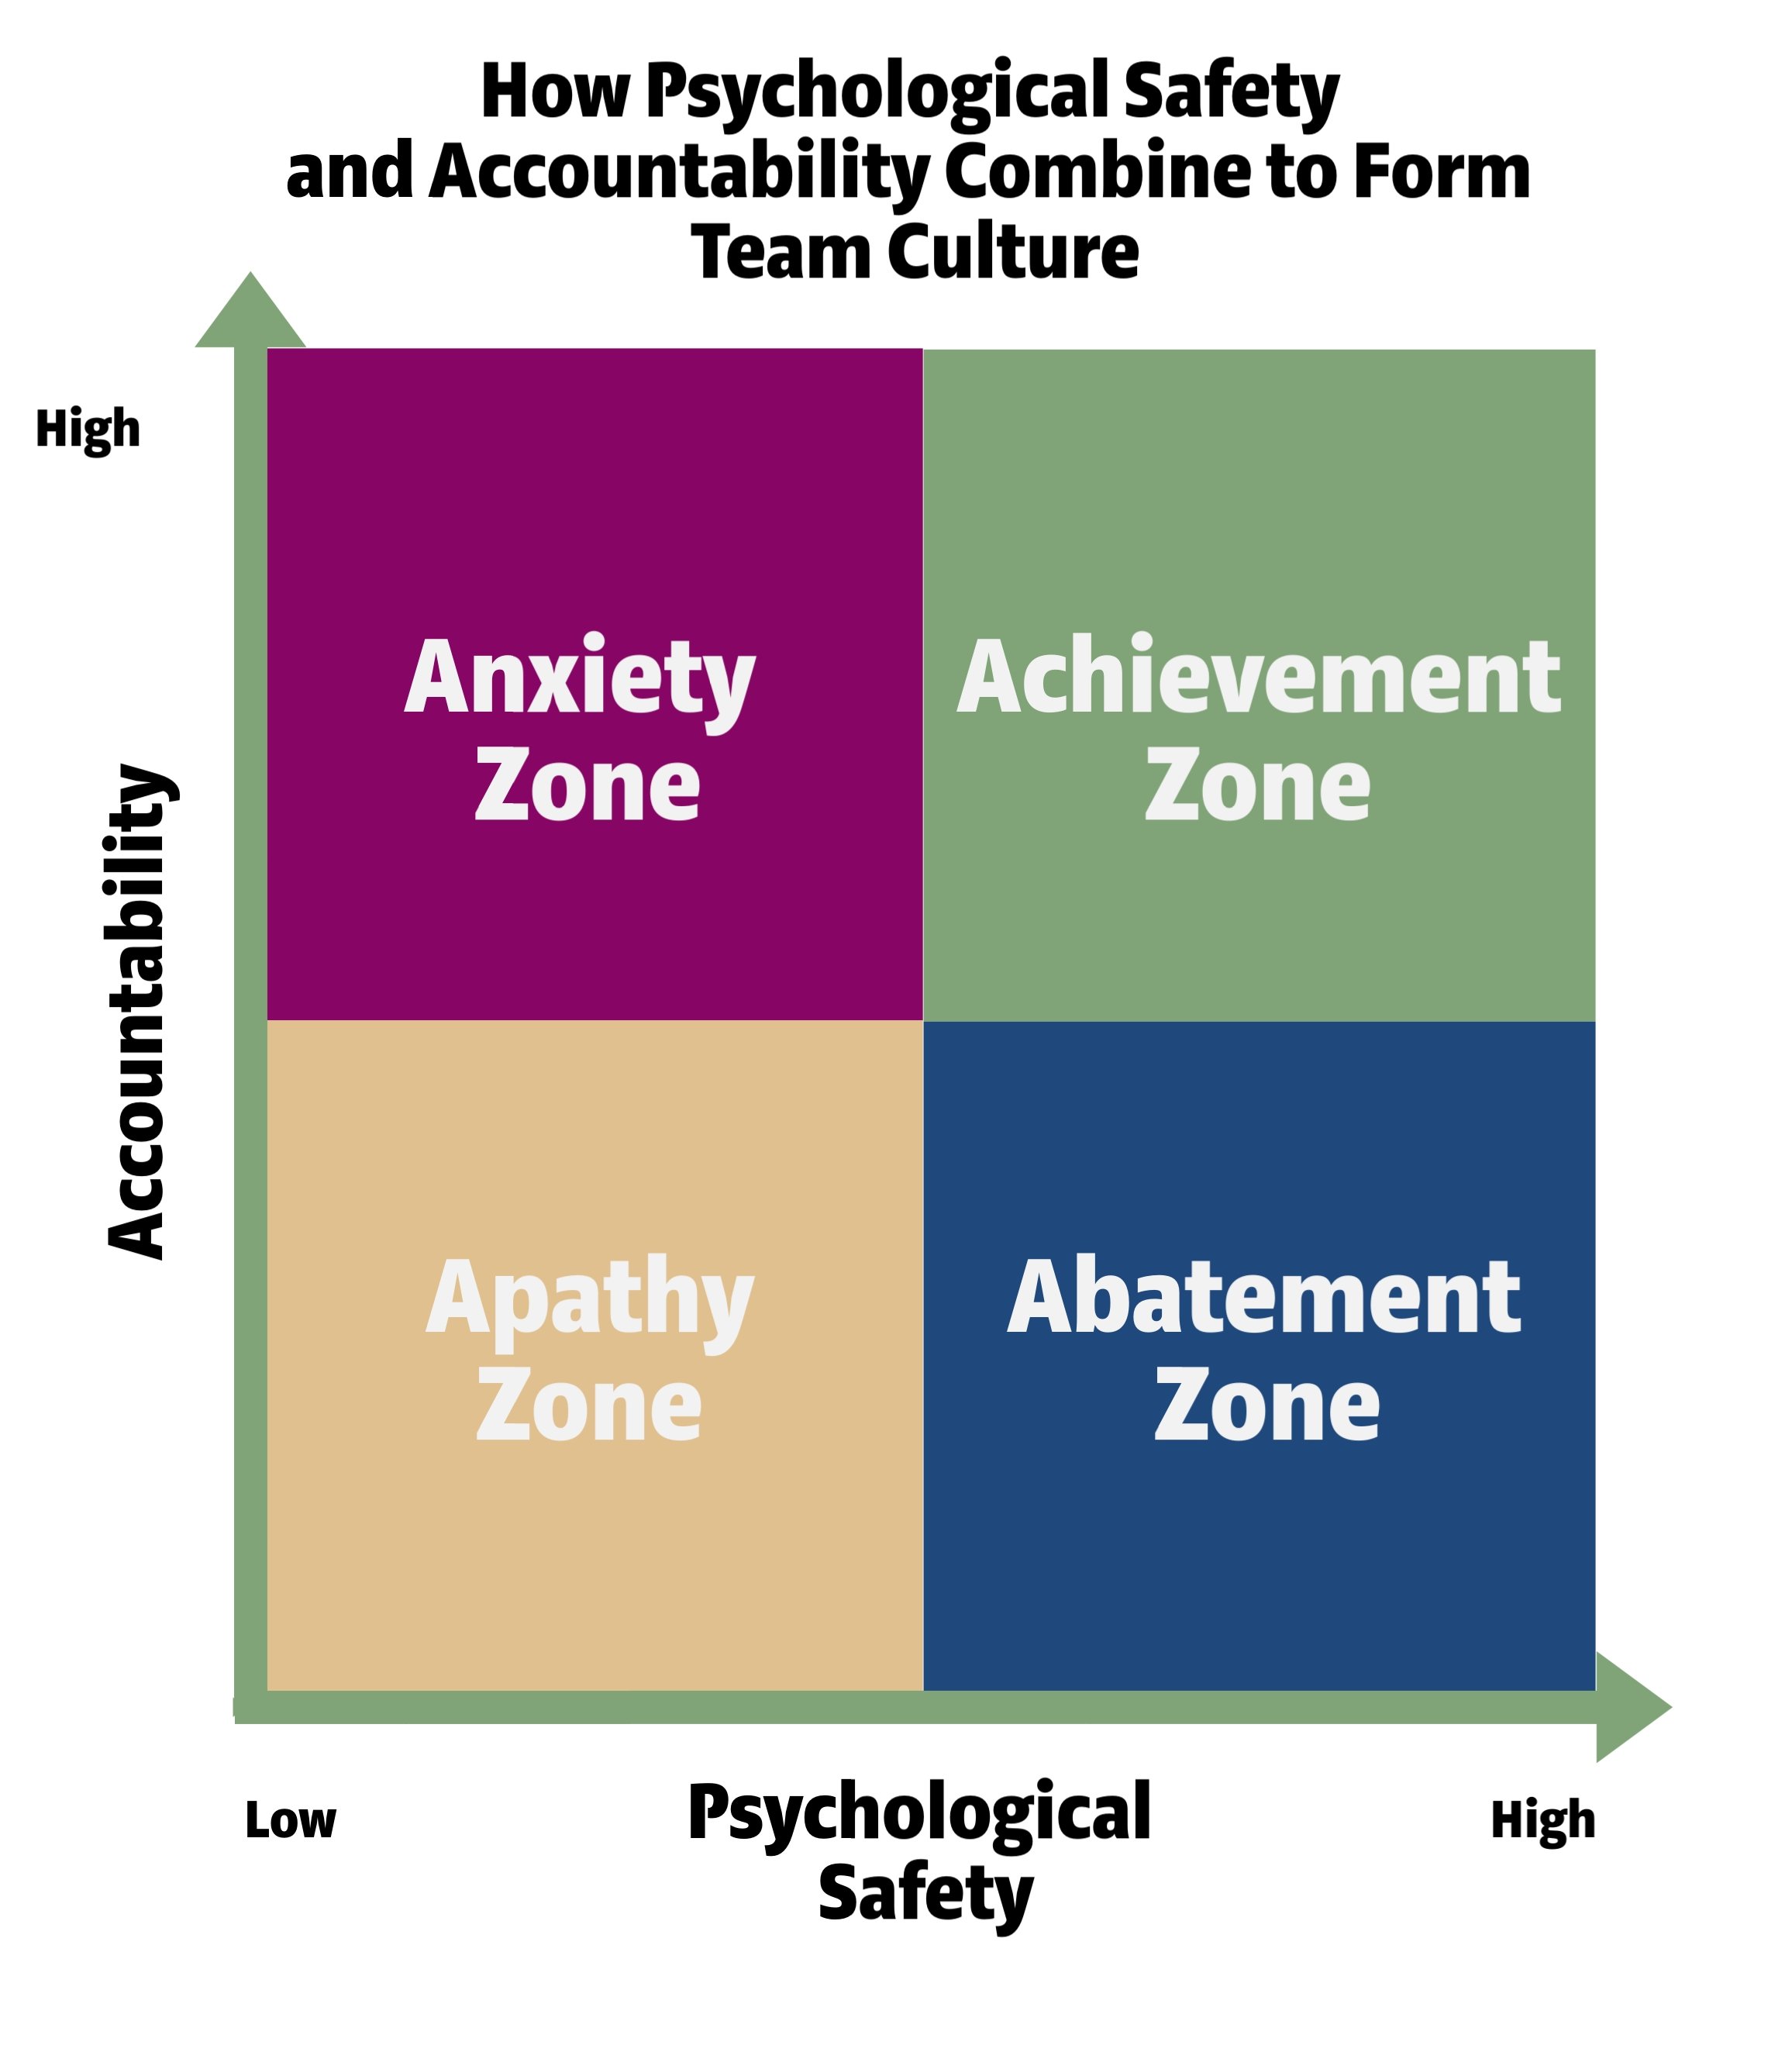 7 Steps to Move Teams Out of the Abatement Zone